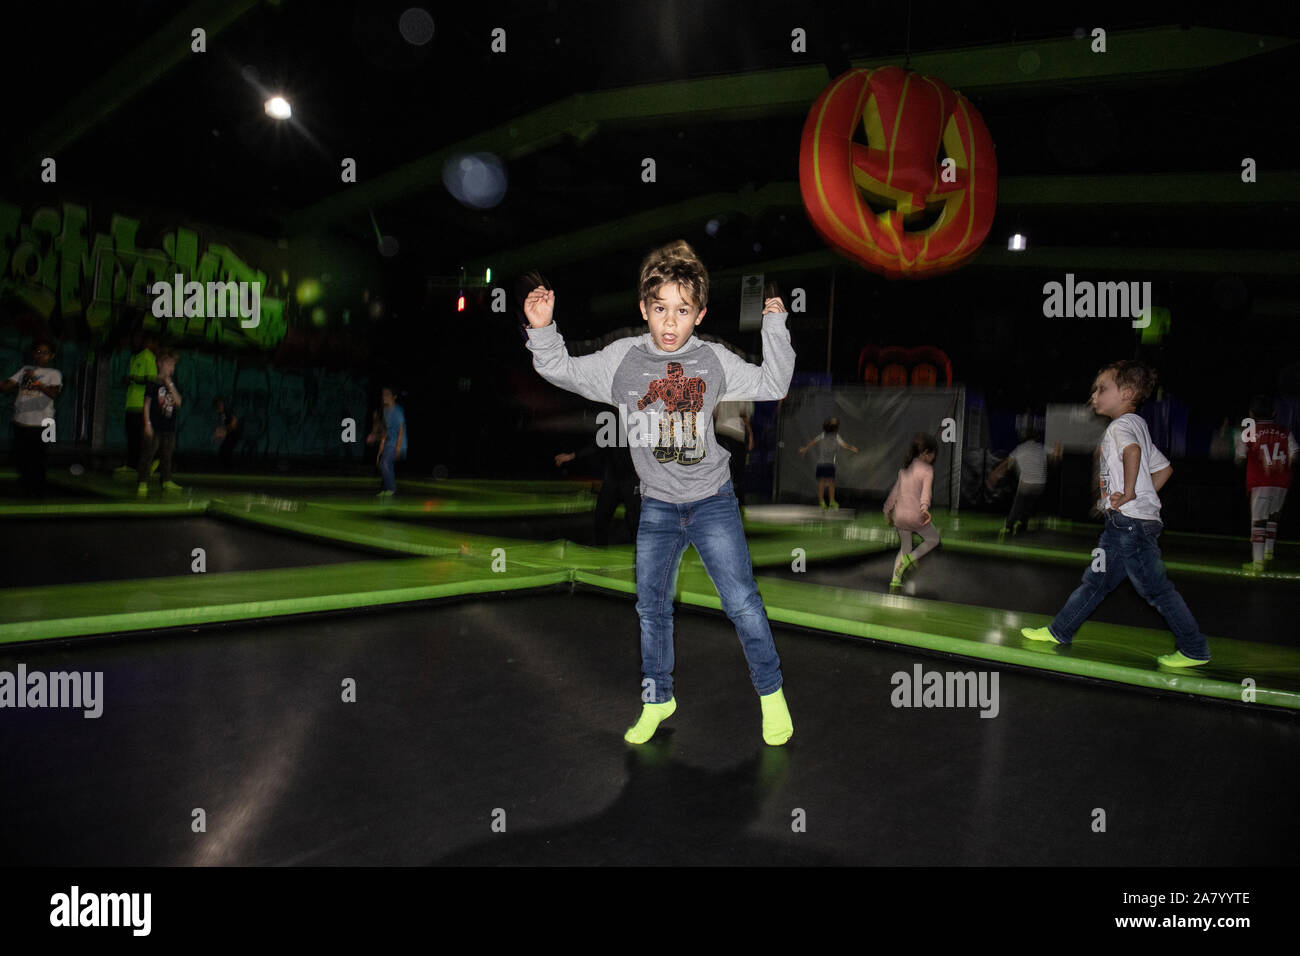 Ideel trojansk hest annoncere 6 year old boy bouncing on a trampoline at 'Flip Out London', situated in  Wandsworth, London's biggest trampoline park, England, UK Stock Photo -  Alamy